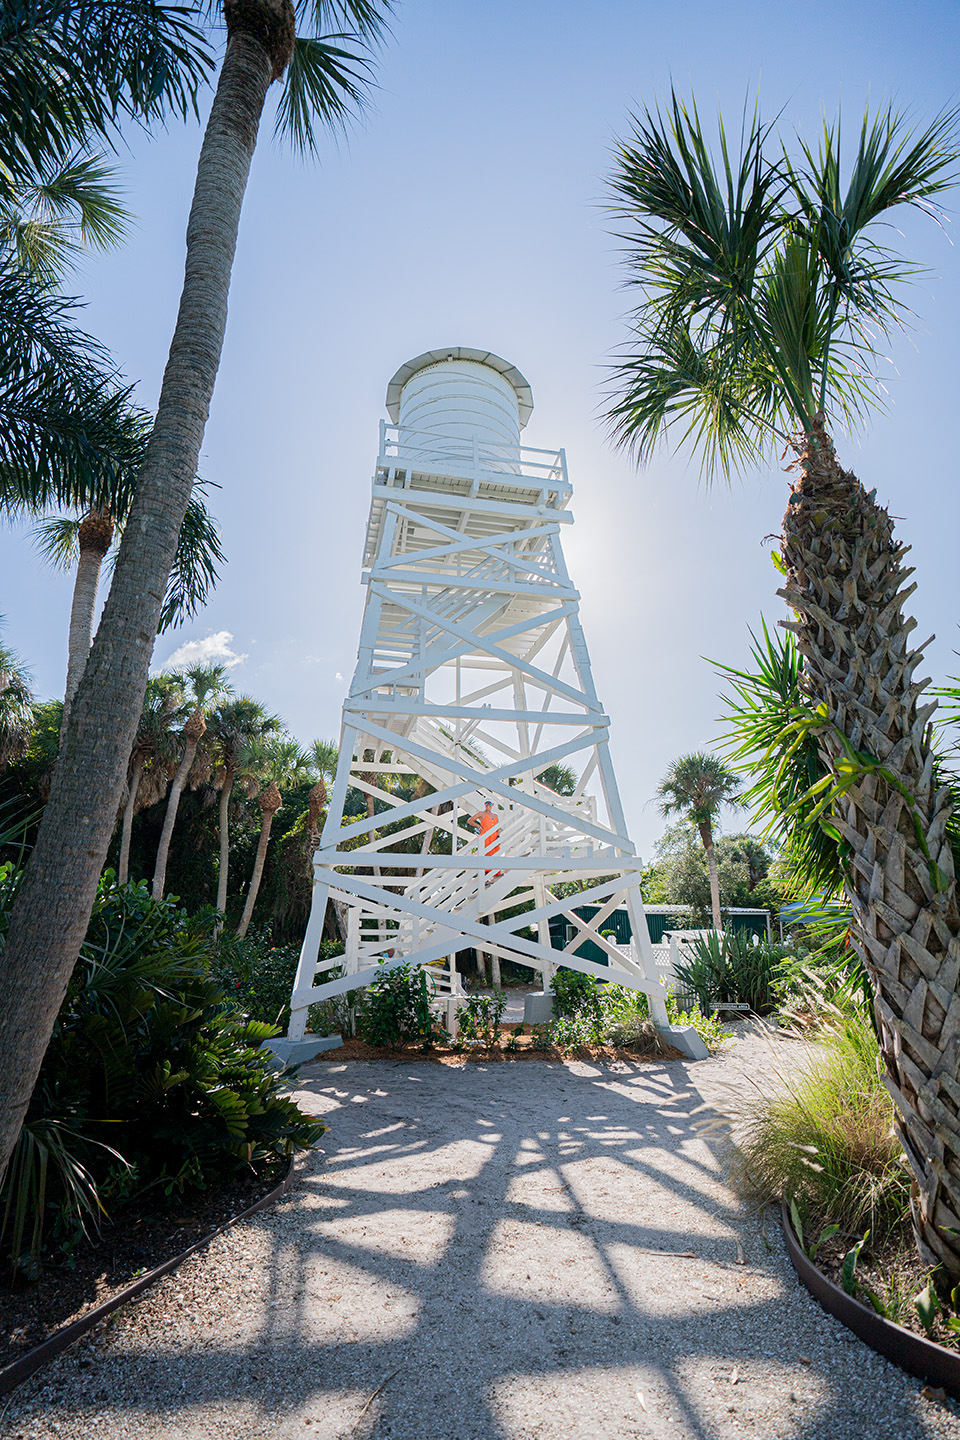 The cabbage key water tower is white, tall, and surrounded by palm trees. This is one of the best things to do near Fort Myers, Florida.